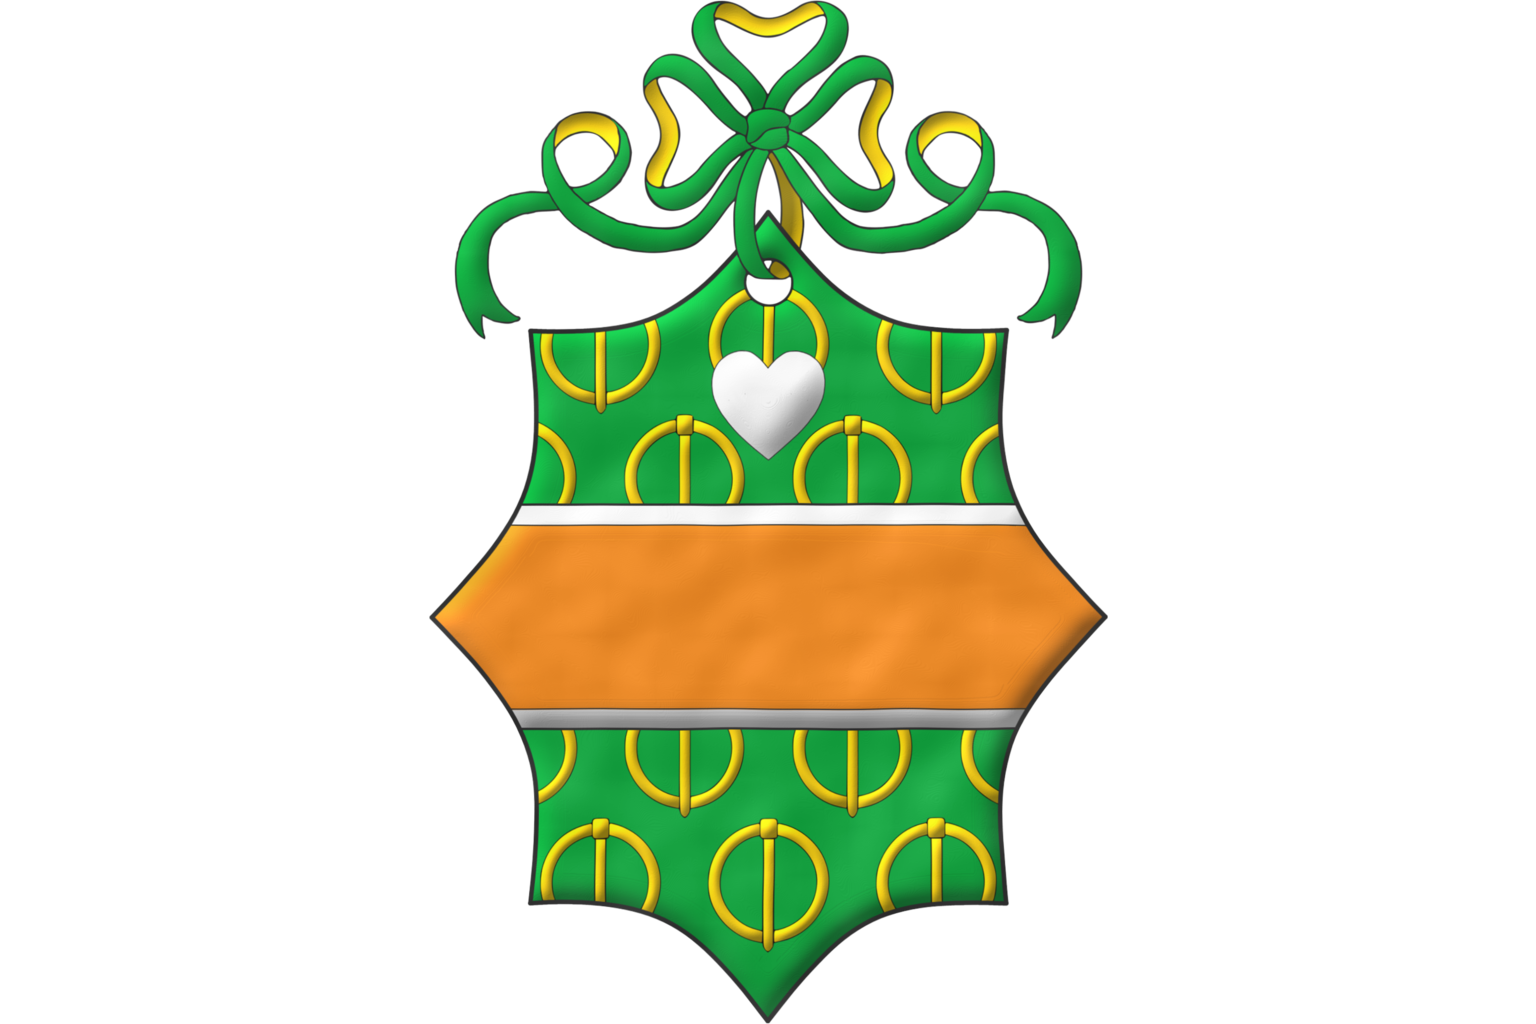 Vert semé of buckles points downward Or, a fess Tenné, fimbriated Argent; a heart Argent for difference. Crest: A ribbon Vert doubled Or.